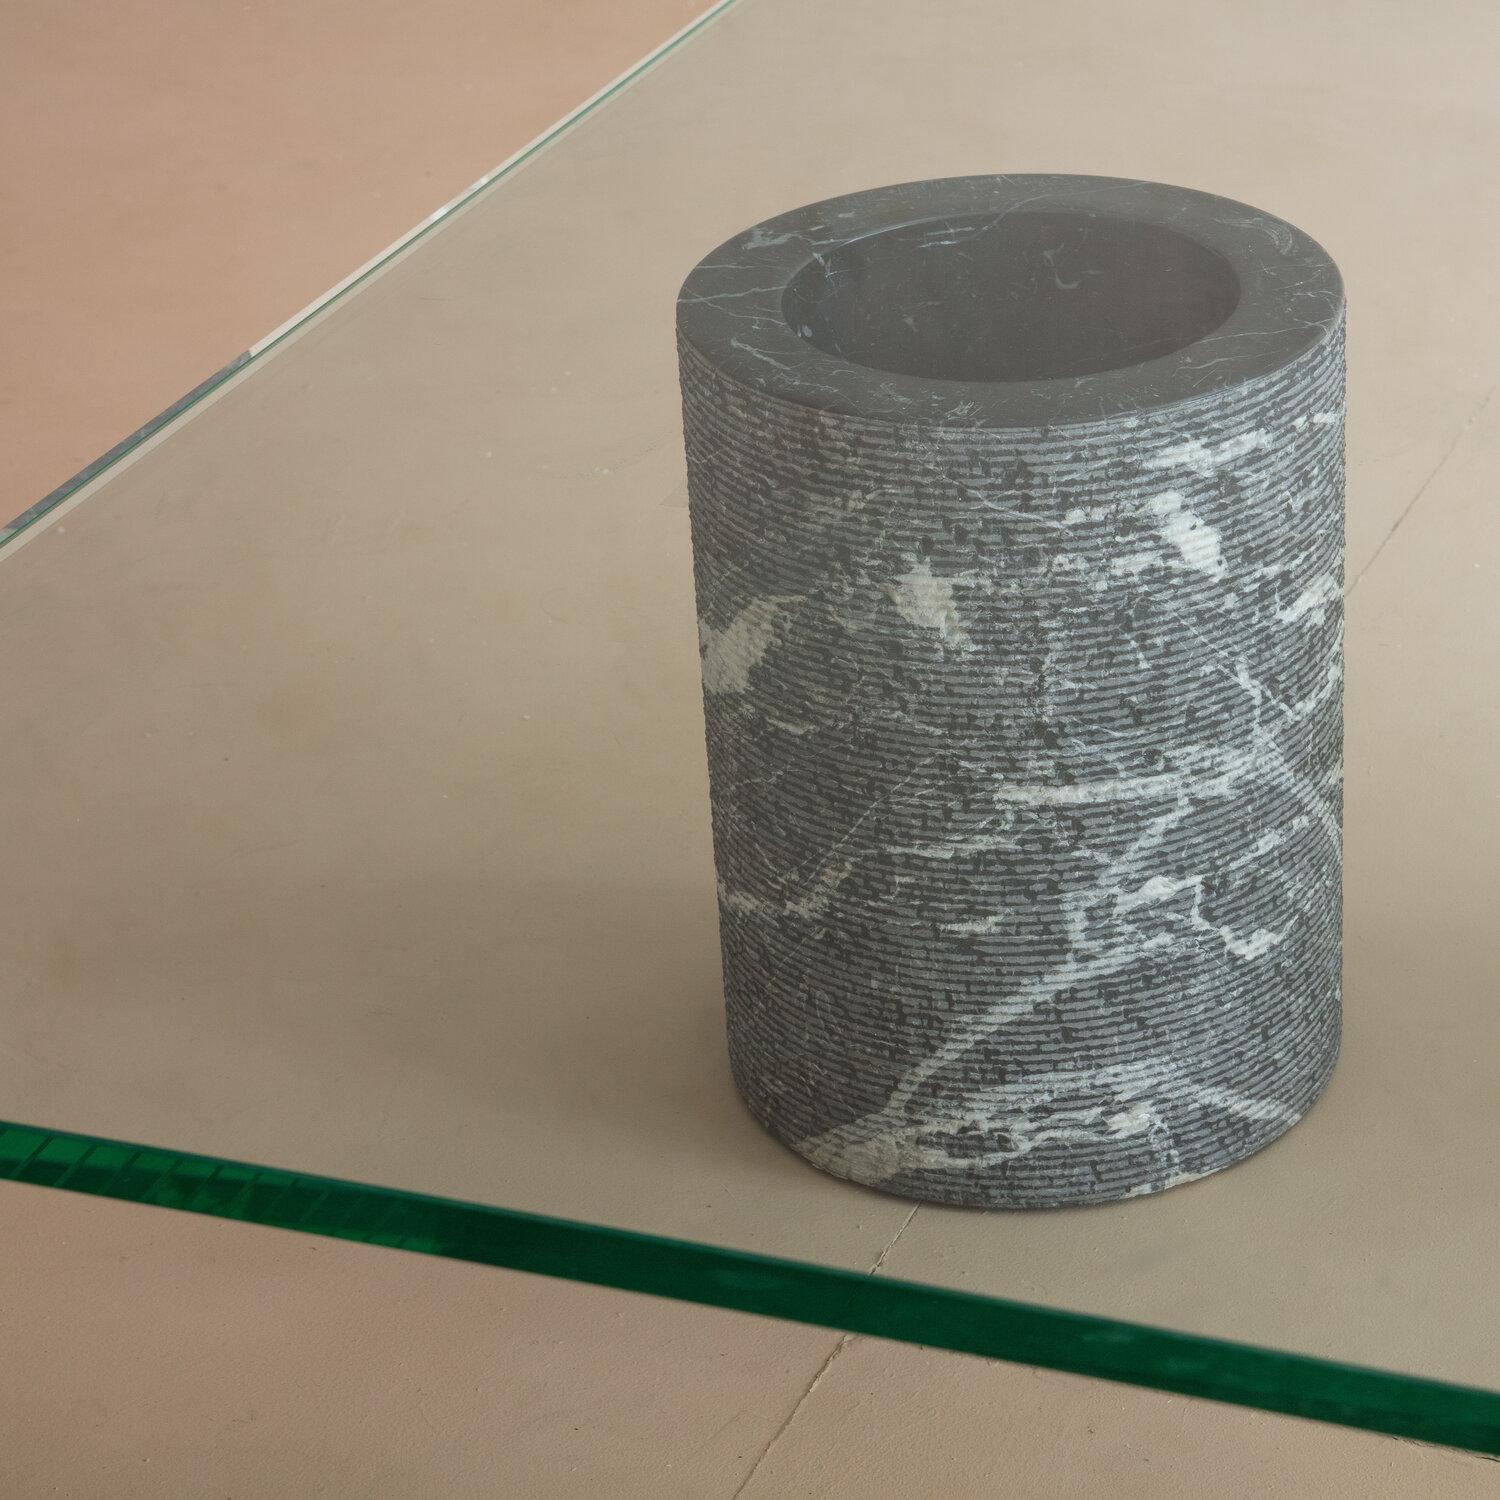 Black Marble Base Coffee Table by Massimo Vignelli for Casigliani 1